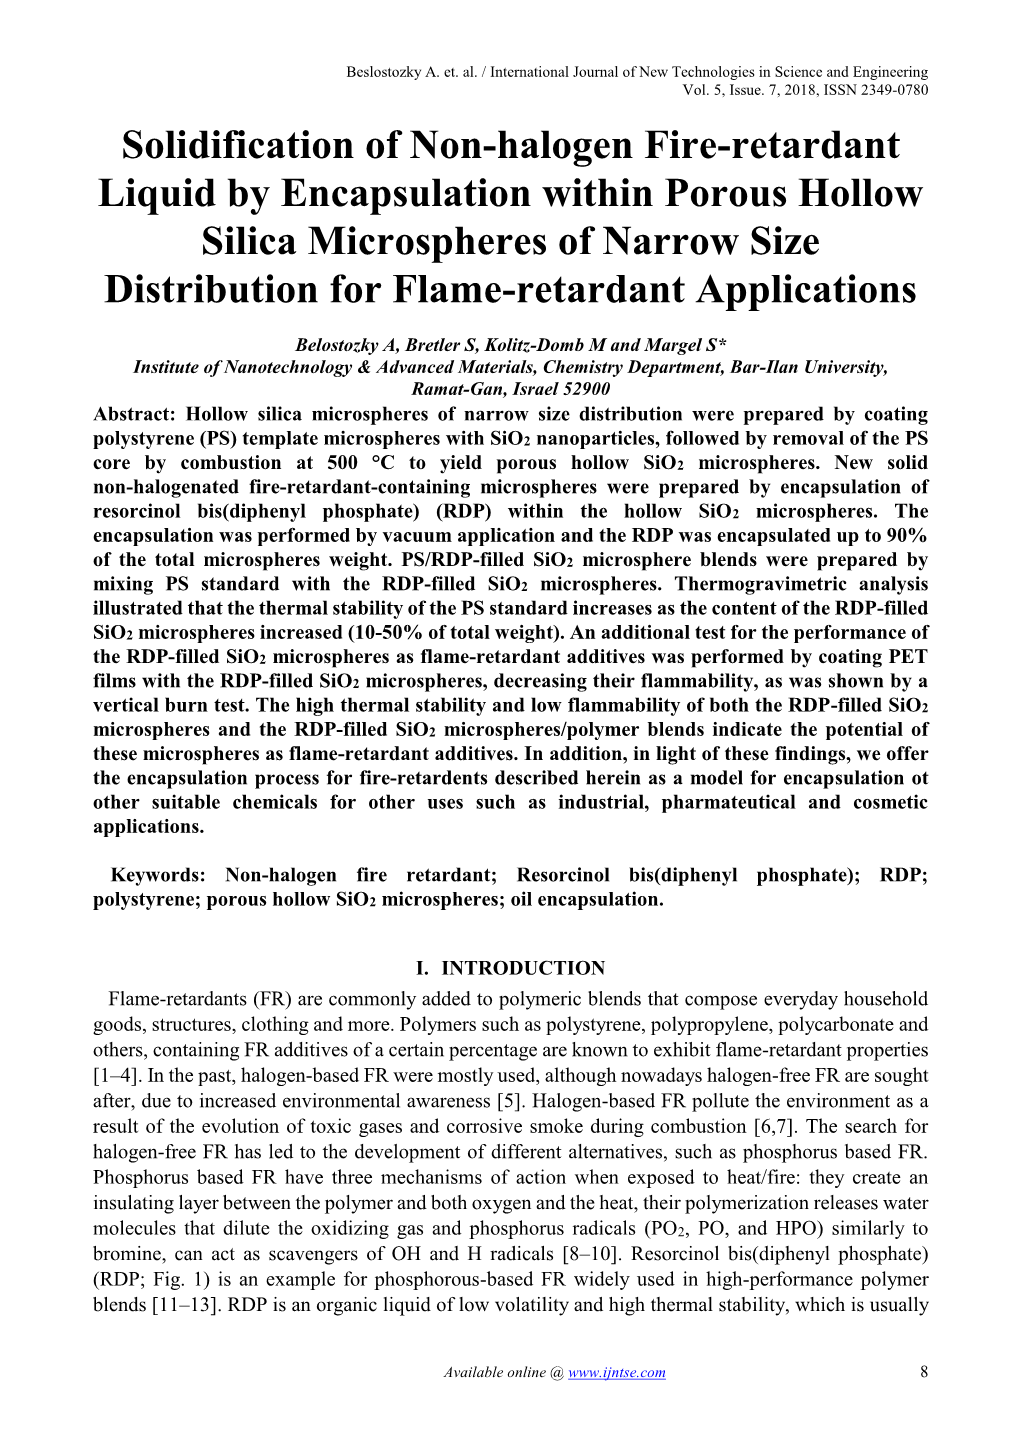 Solidification of Non-Halogen Fire-Retardant Liquid by Encapsulation Within Porous Hollow Silica Microspheres of Narrow Size